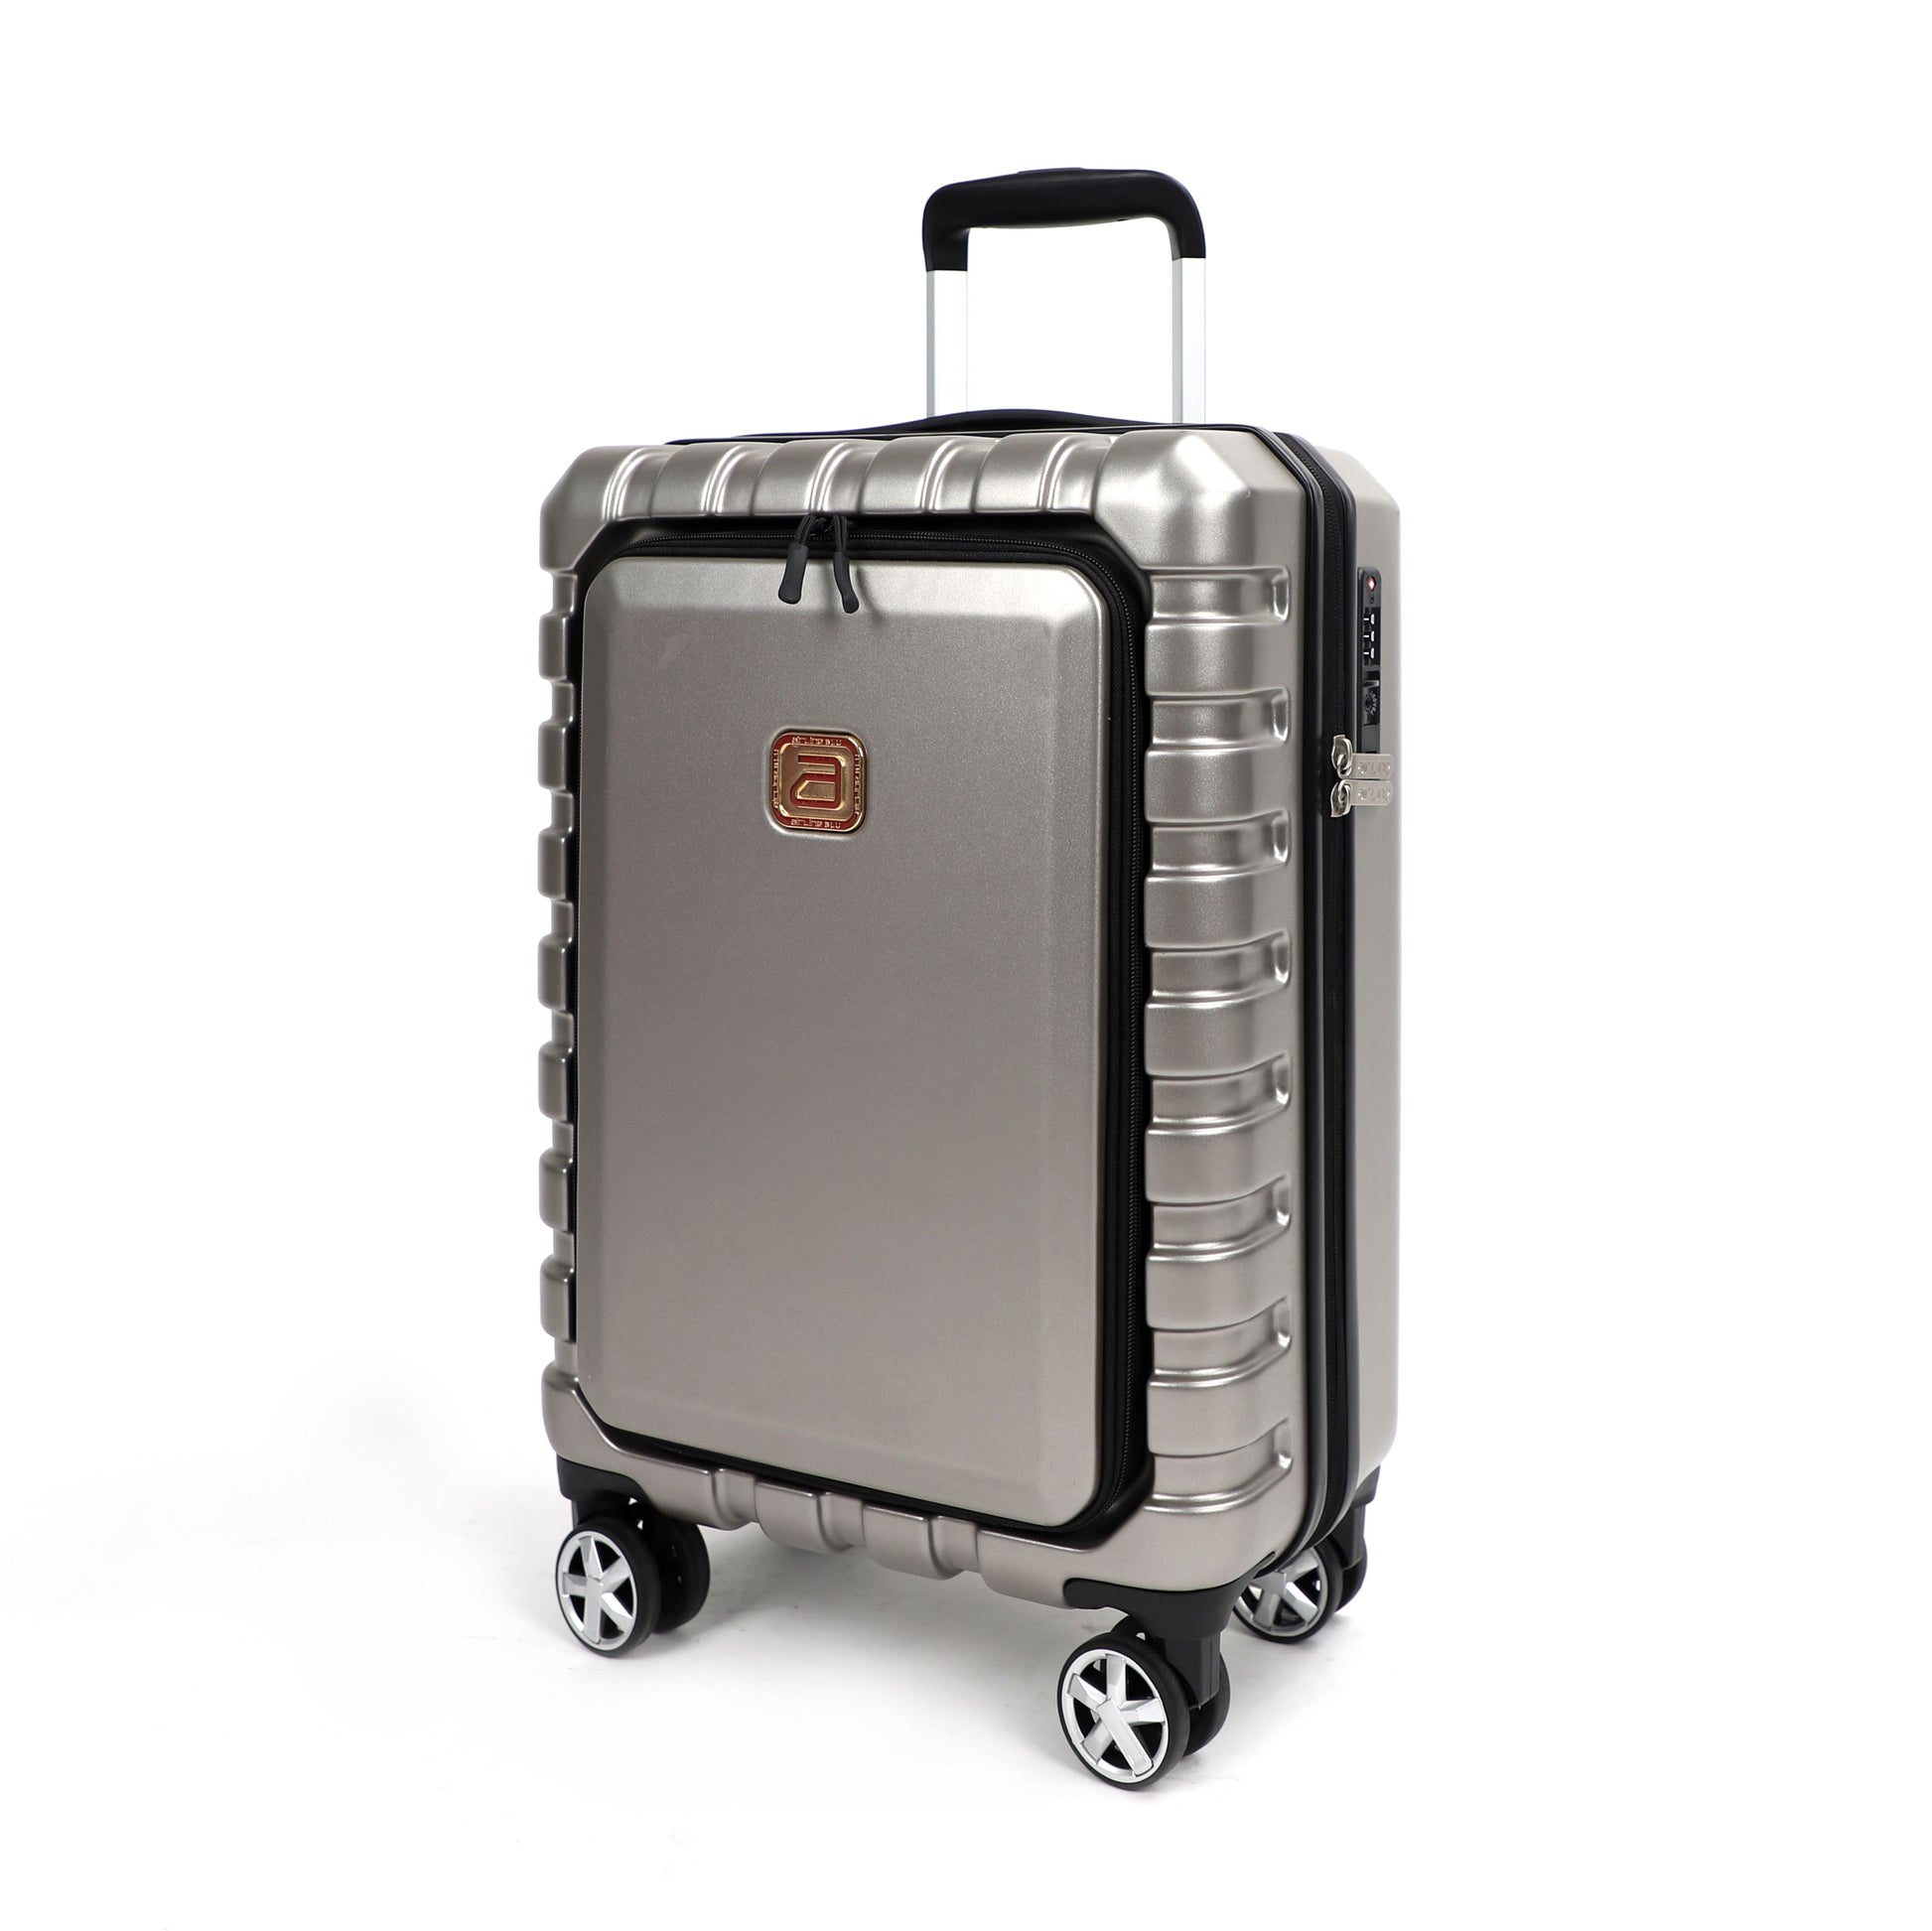 Airline_Carry_On_Luggage_iron_grey_Side_view_T1978155101